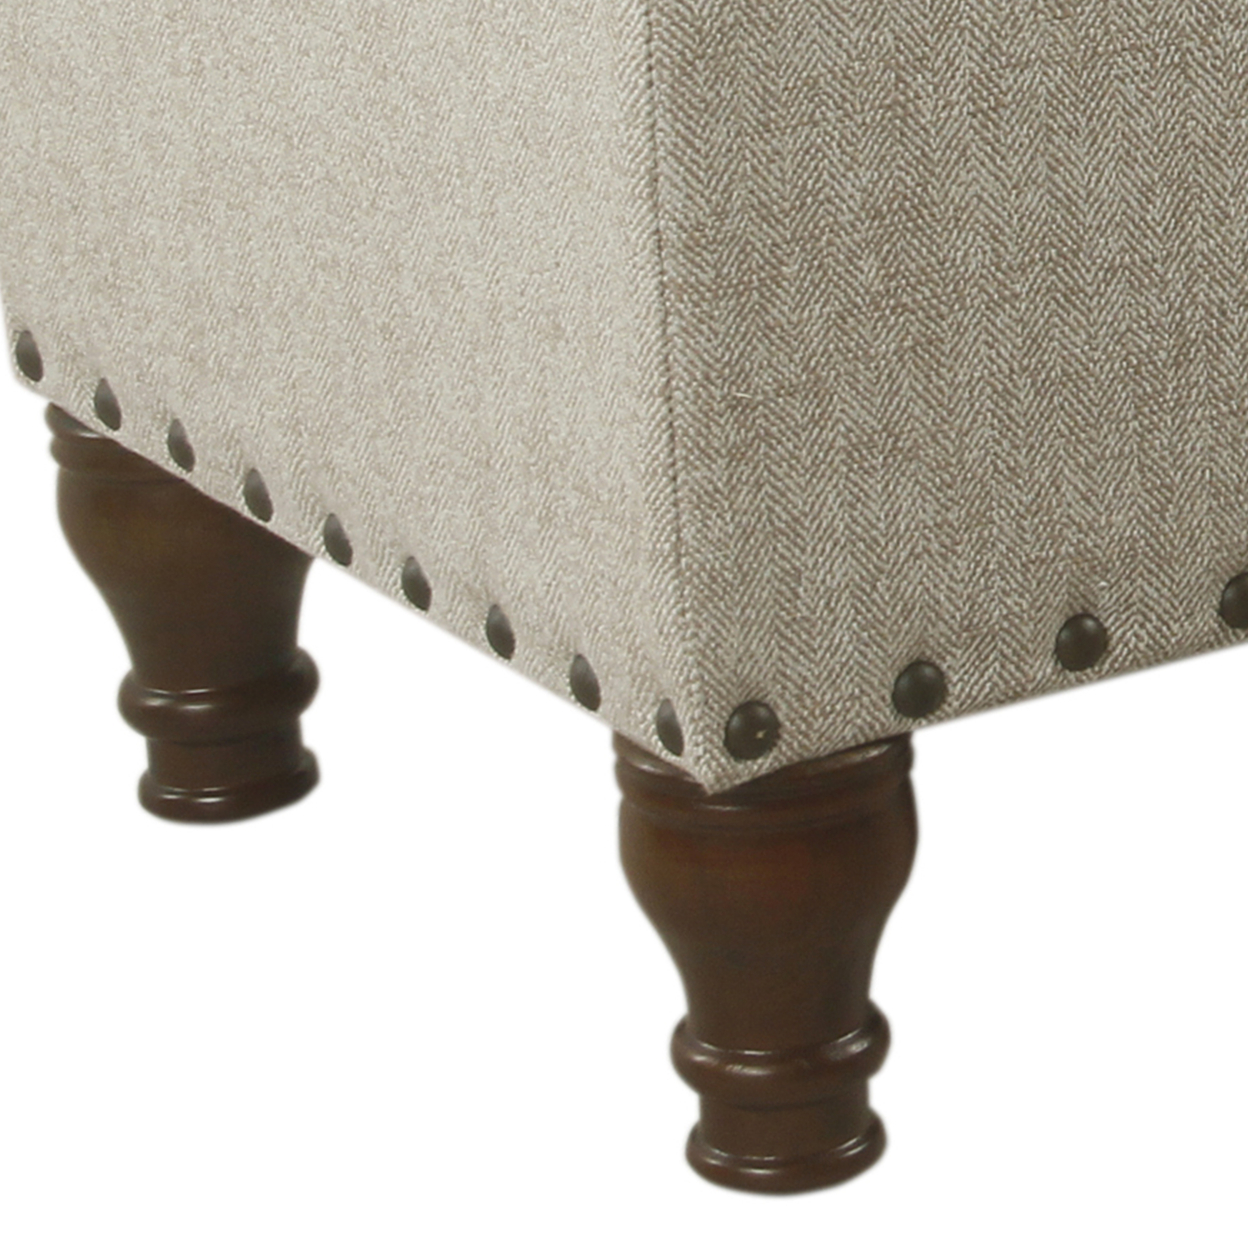 Textured Fabric Upholstered Wooden Storage Bench With Nail Head Trim, Large, Beige And Brown- Saltoro Sherpi